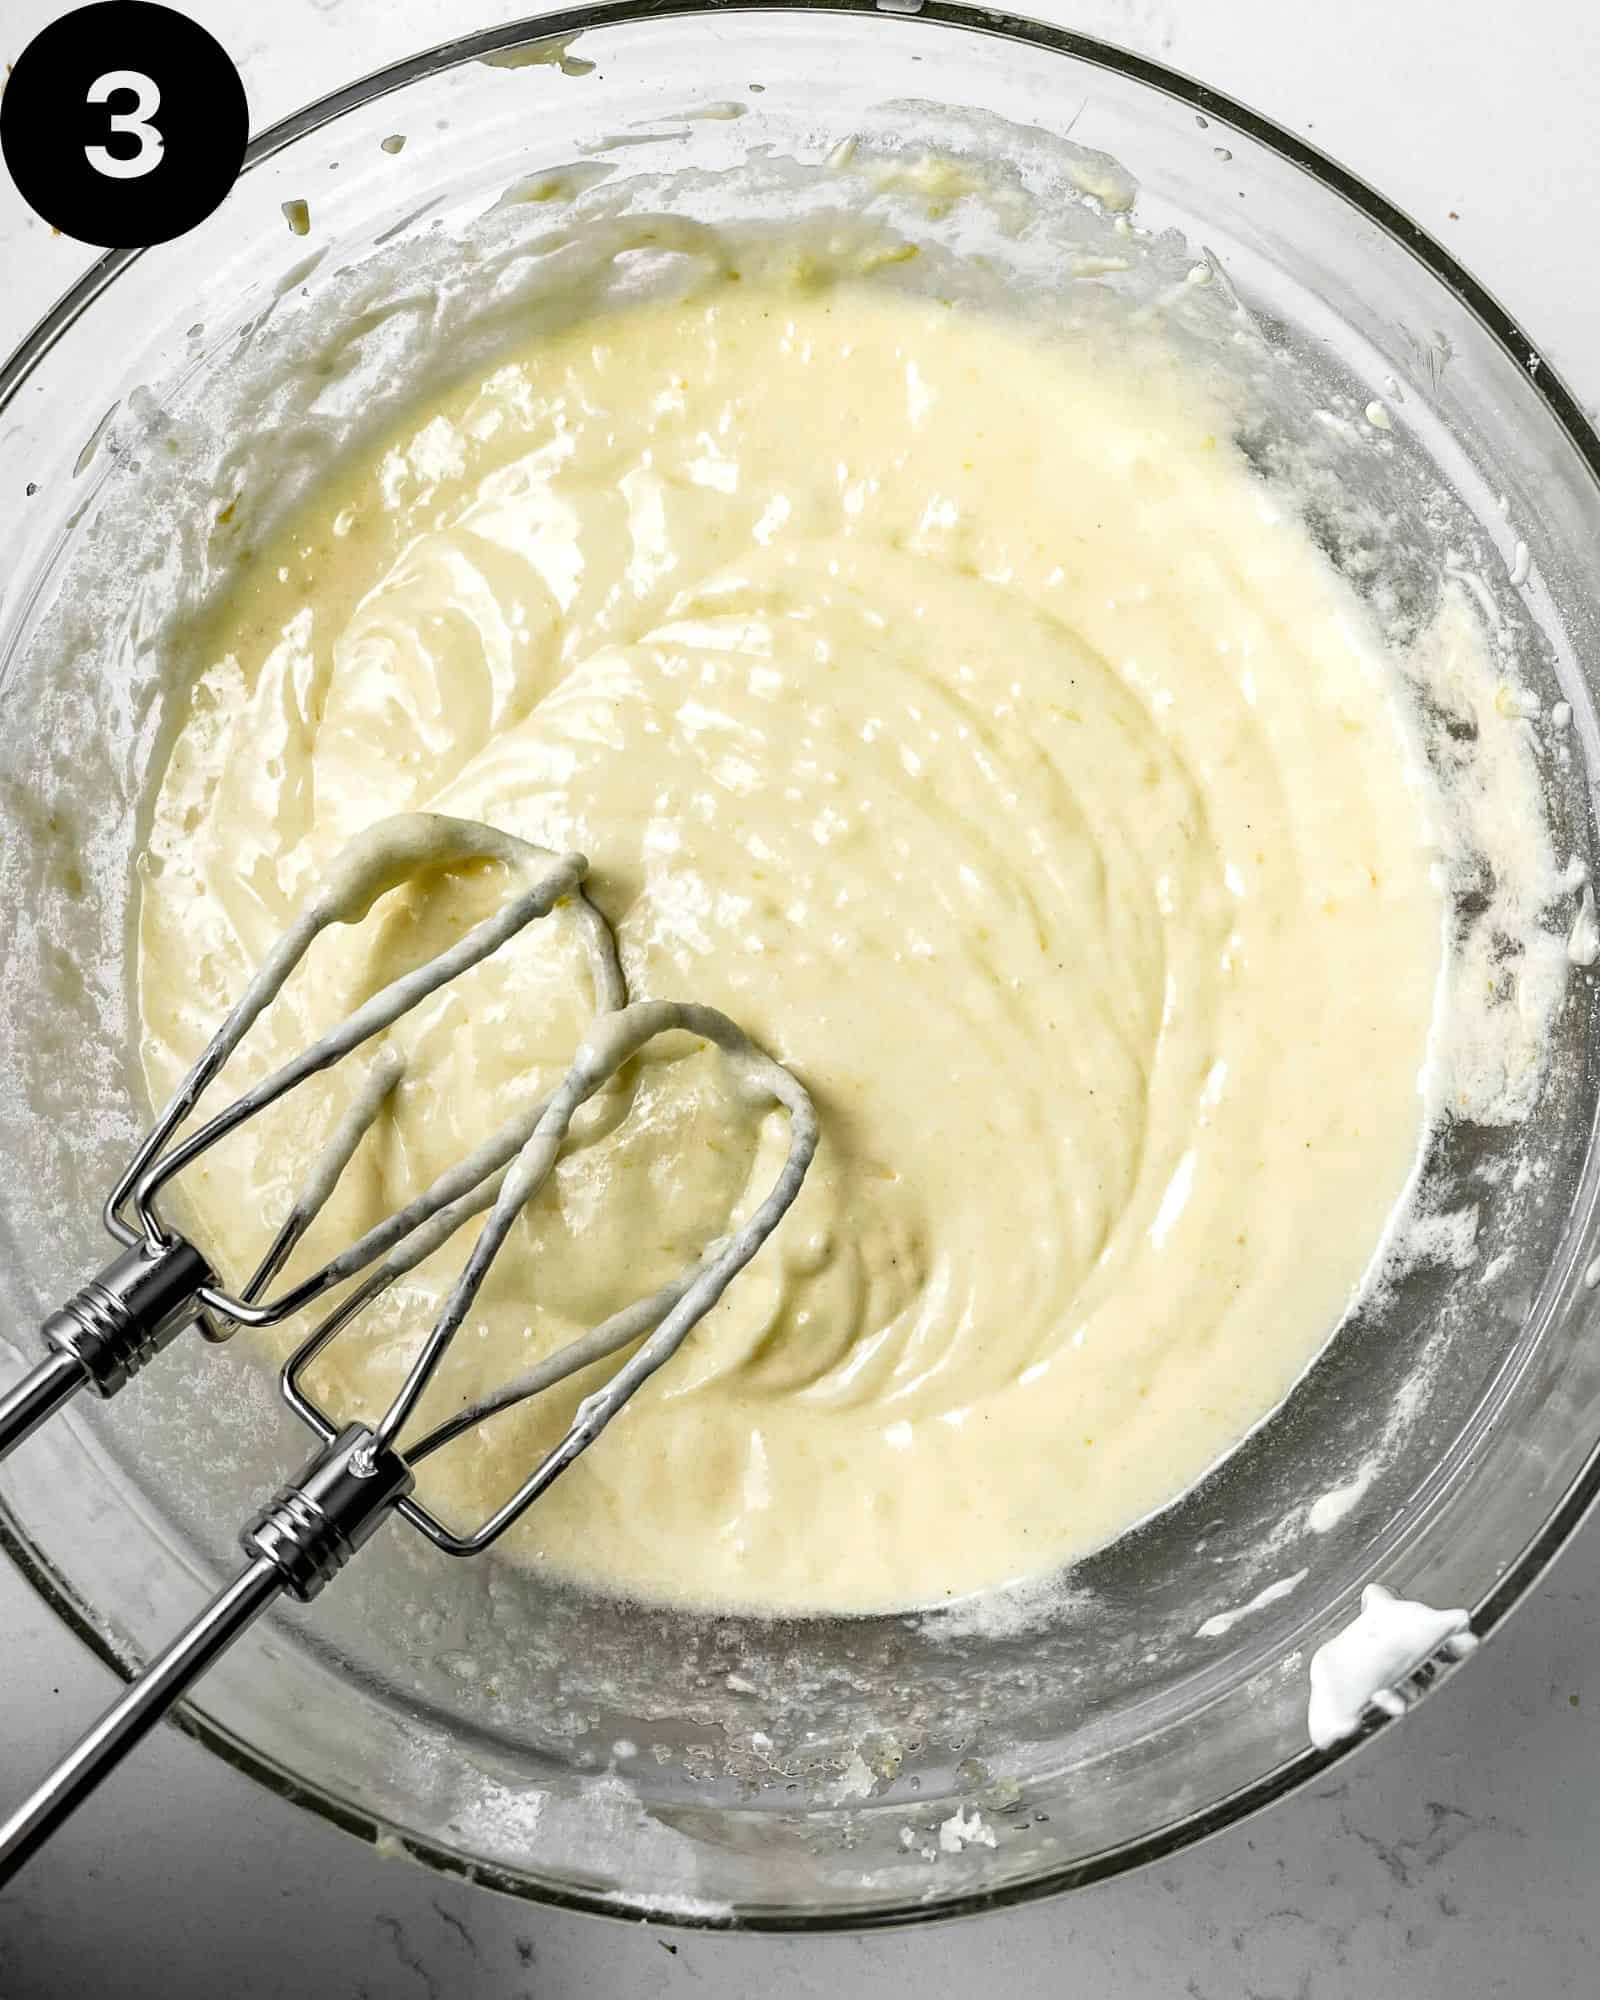 butter, sugar, oil, and eggs creamed together in a mixing bowl.